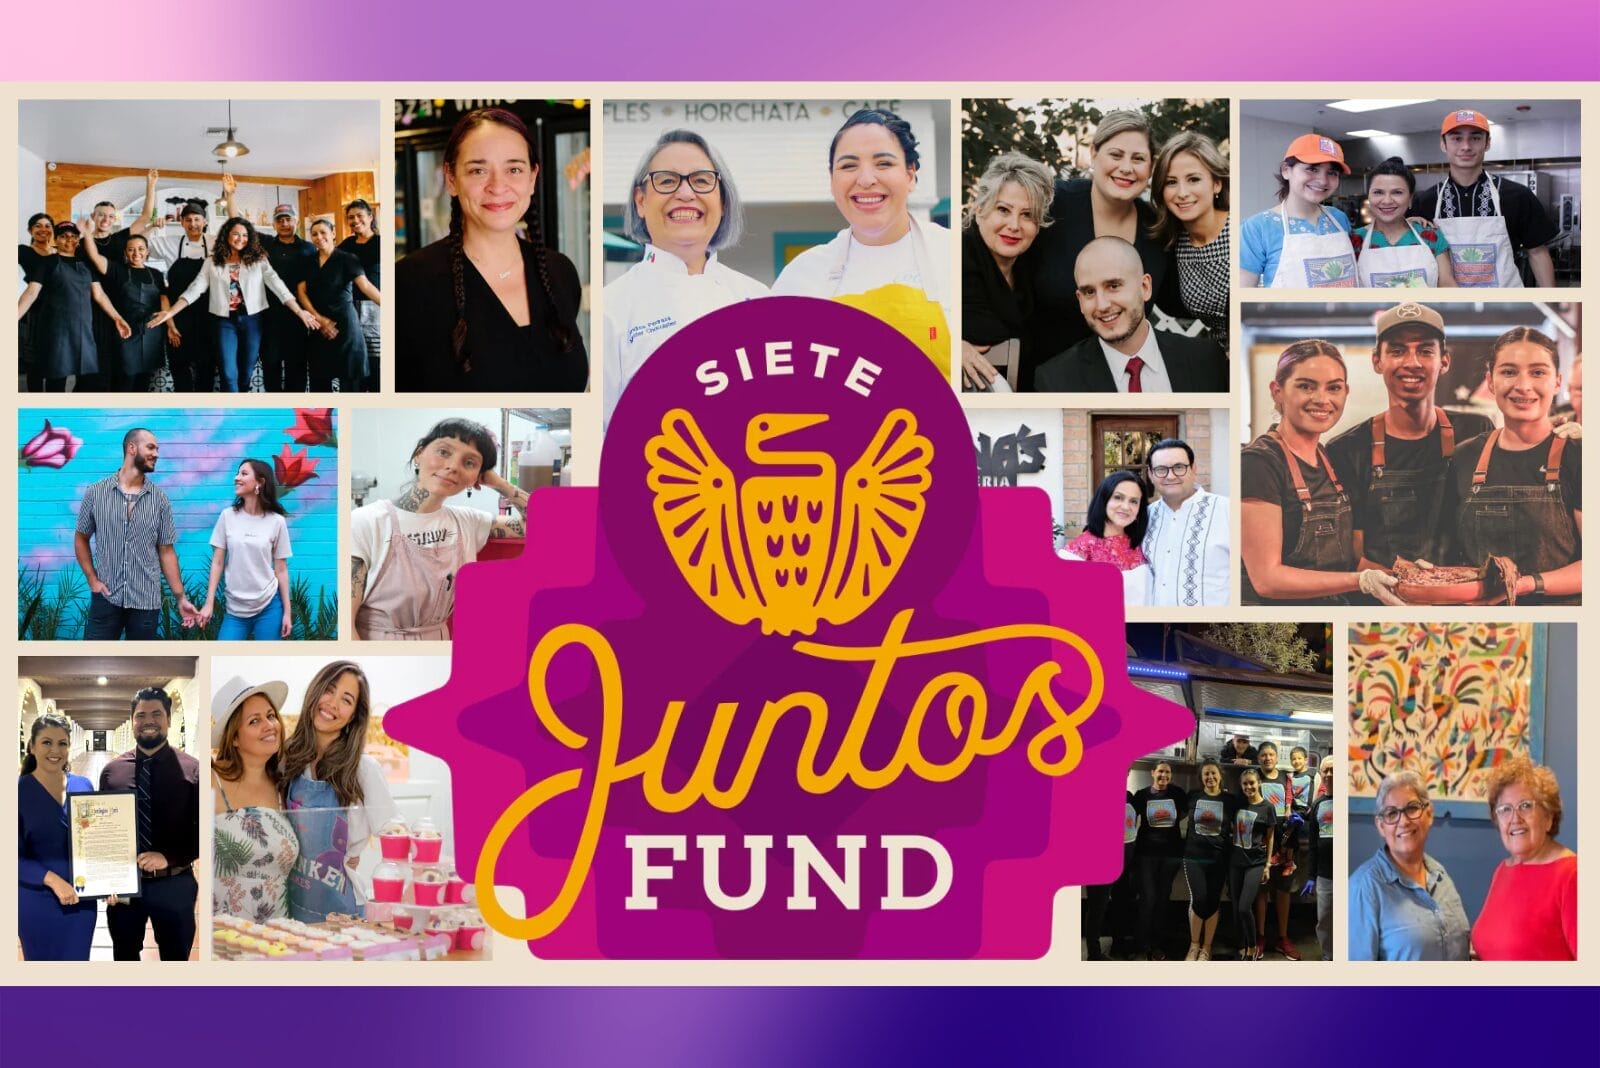 Collage of recipient winners with Siete Juntos Fund logo in the the middle.